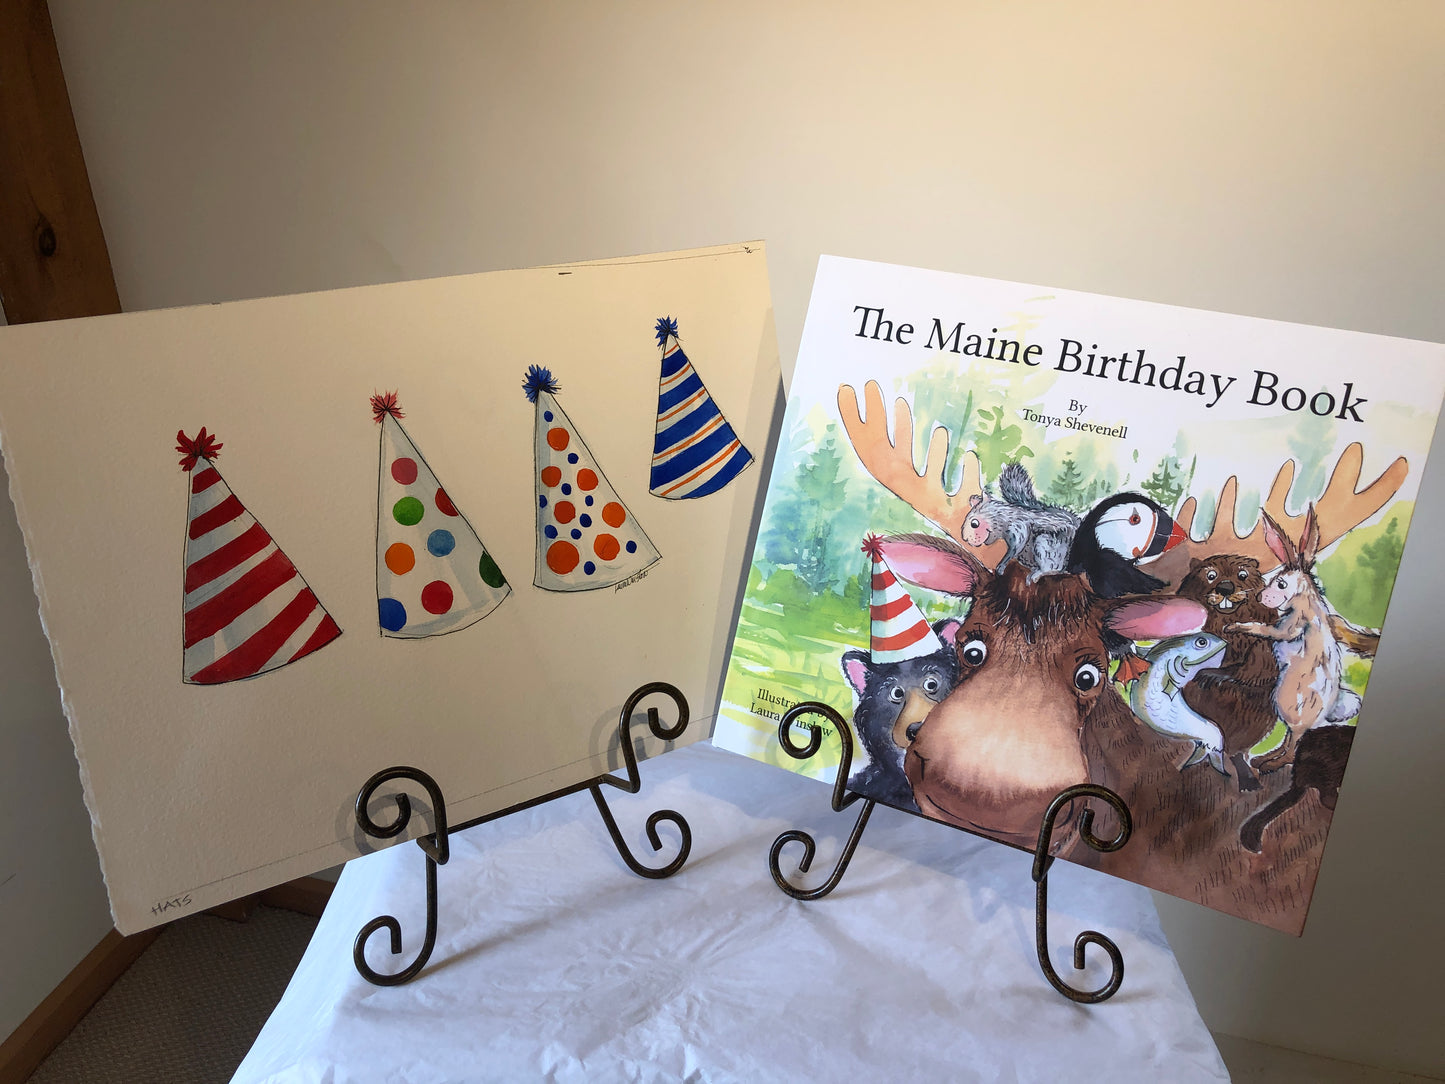 Party Hats - Original Watercolor Painting by Laura Winslow from The Maine Birthday Book plus Book #118 from the First Printing